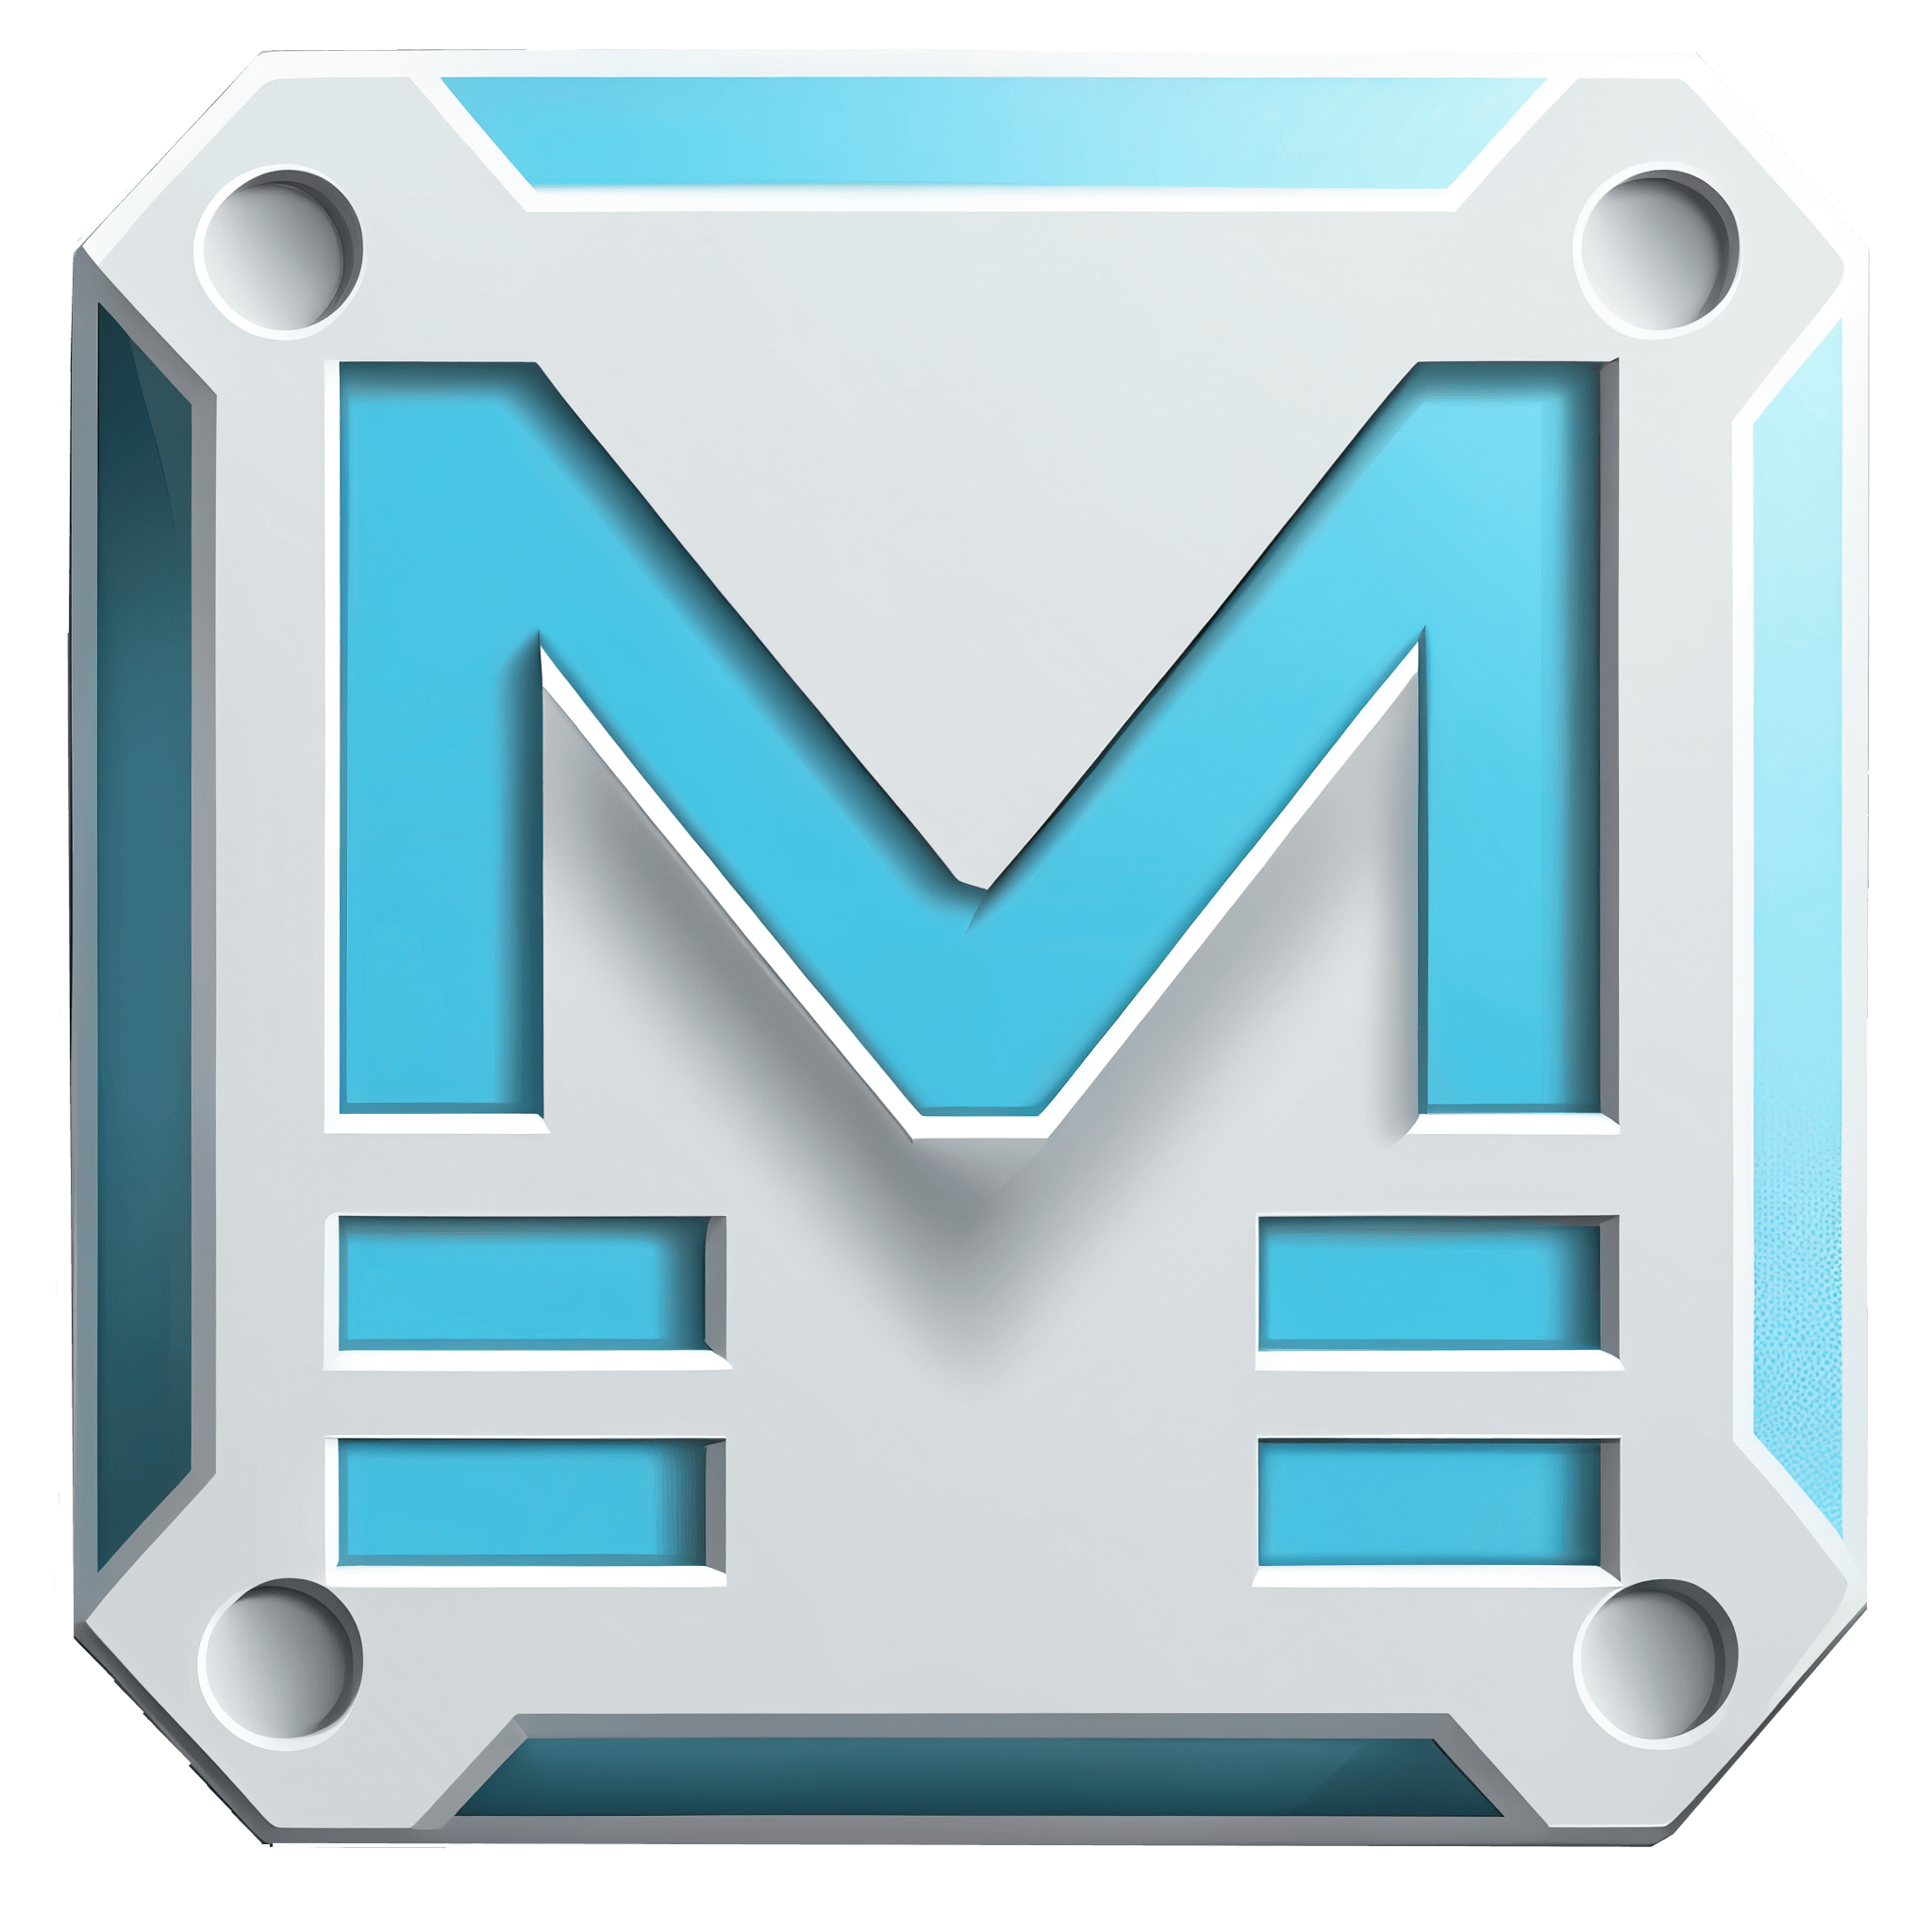 A 3D letter M with a metallic and cyan color scheme presented as a modern, tech-inspired logo.